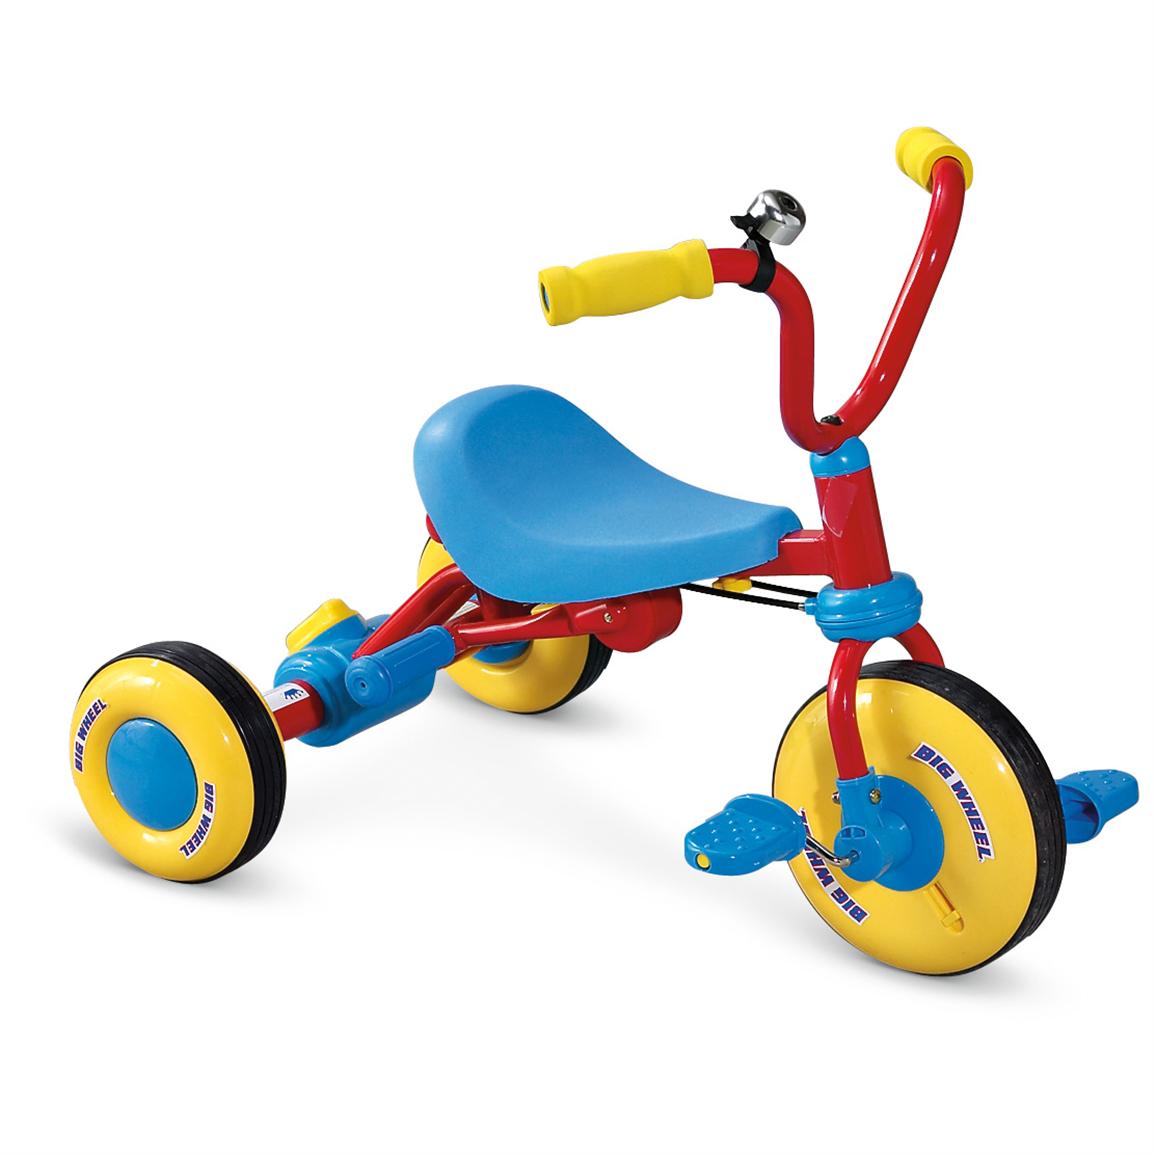 Big Wheel® Trainer Trike - 139733, Riding Toys at Sportsman's Guide